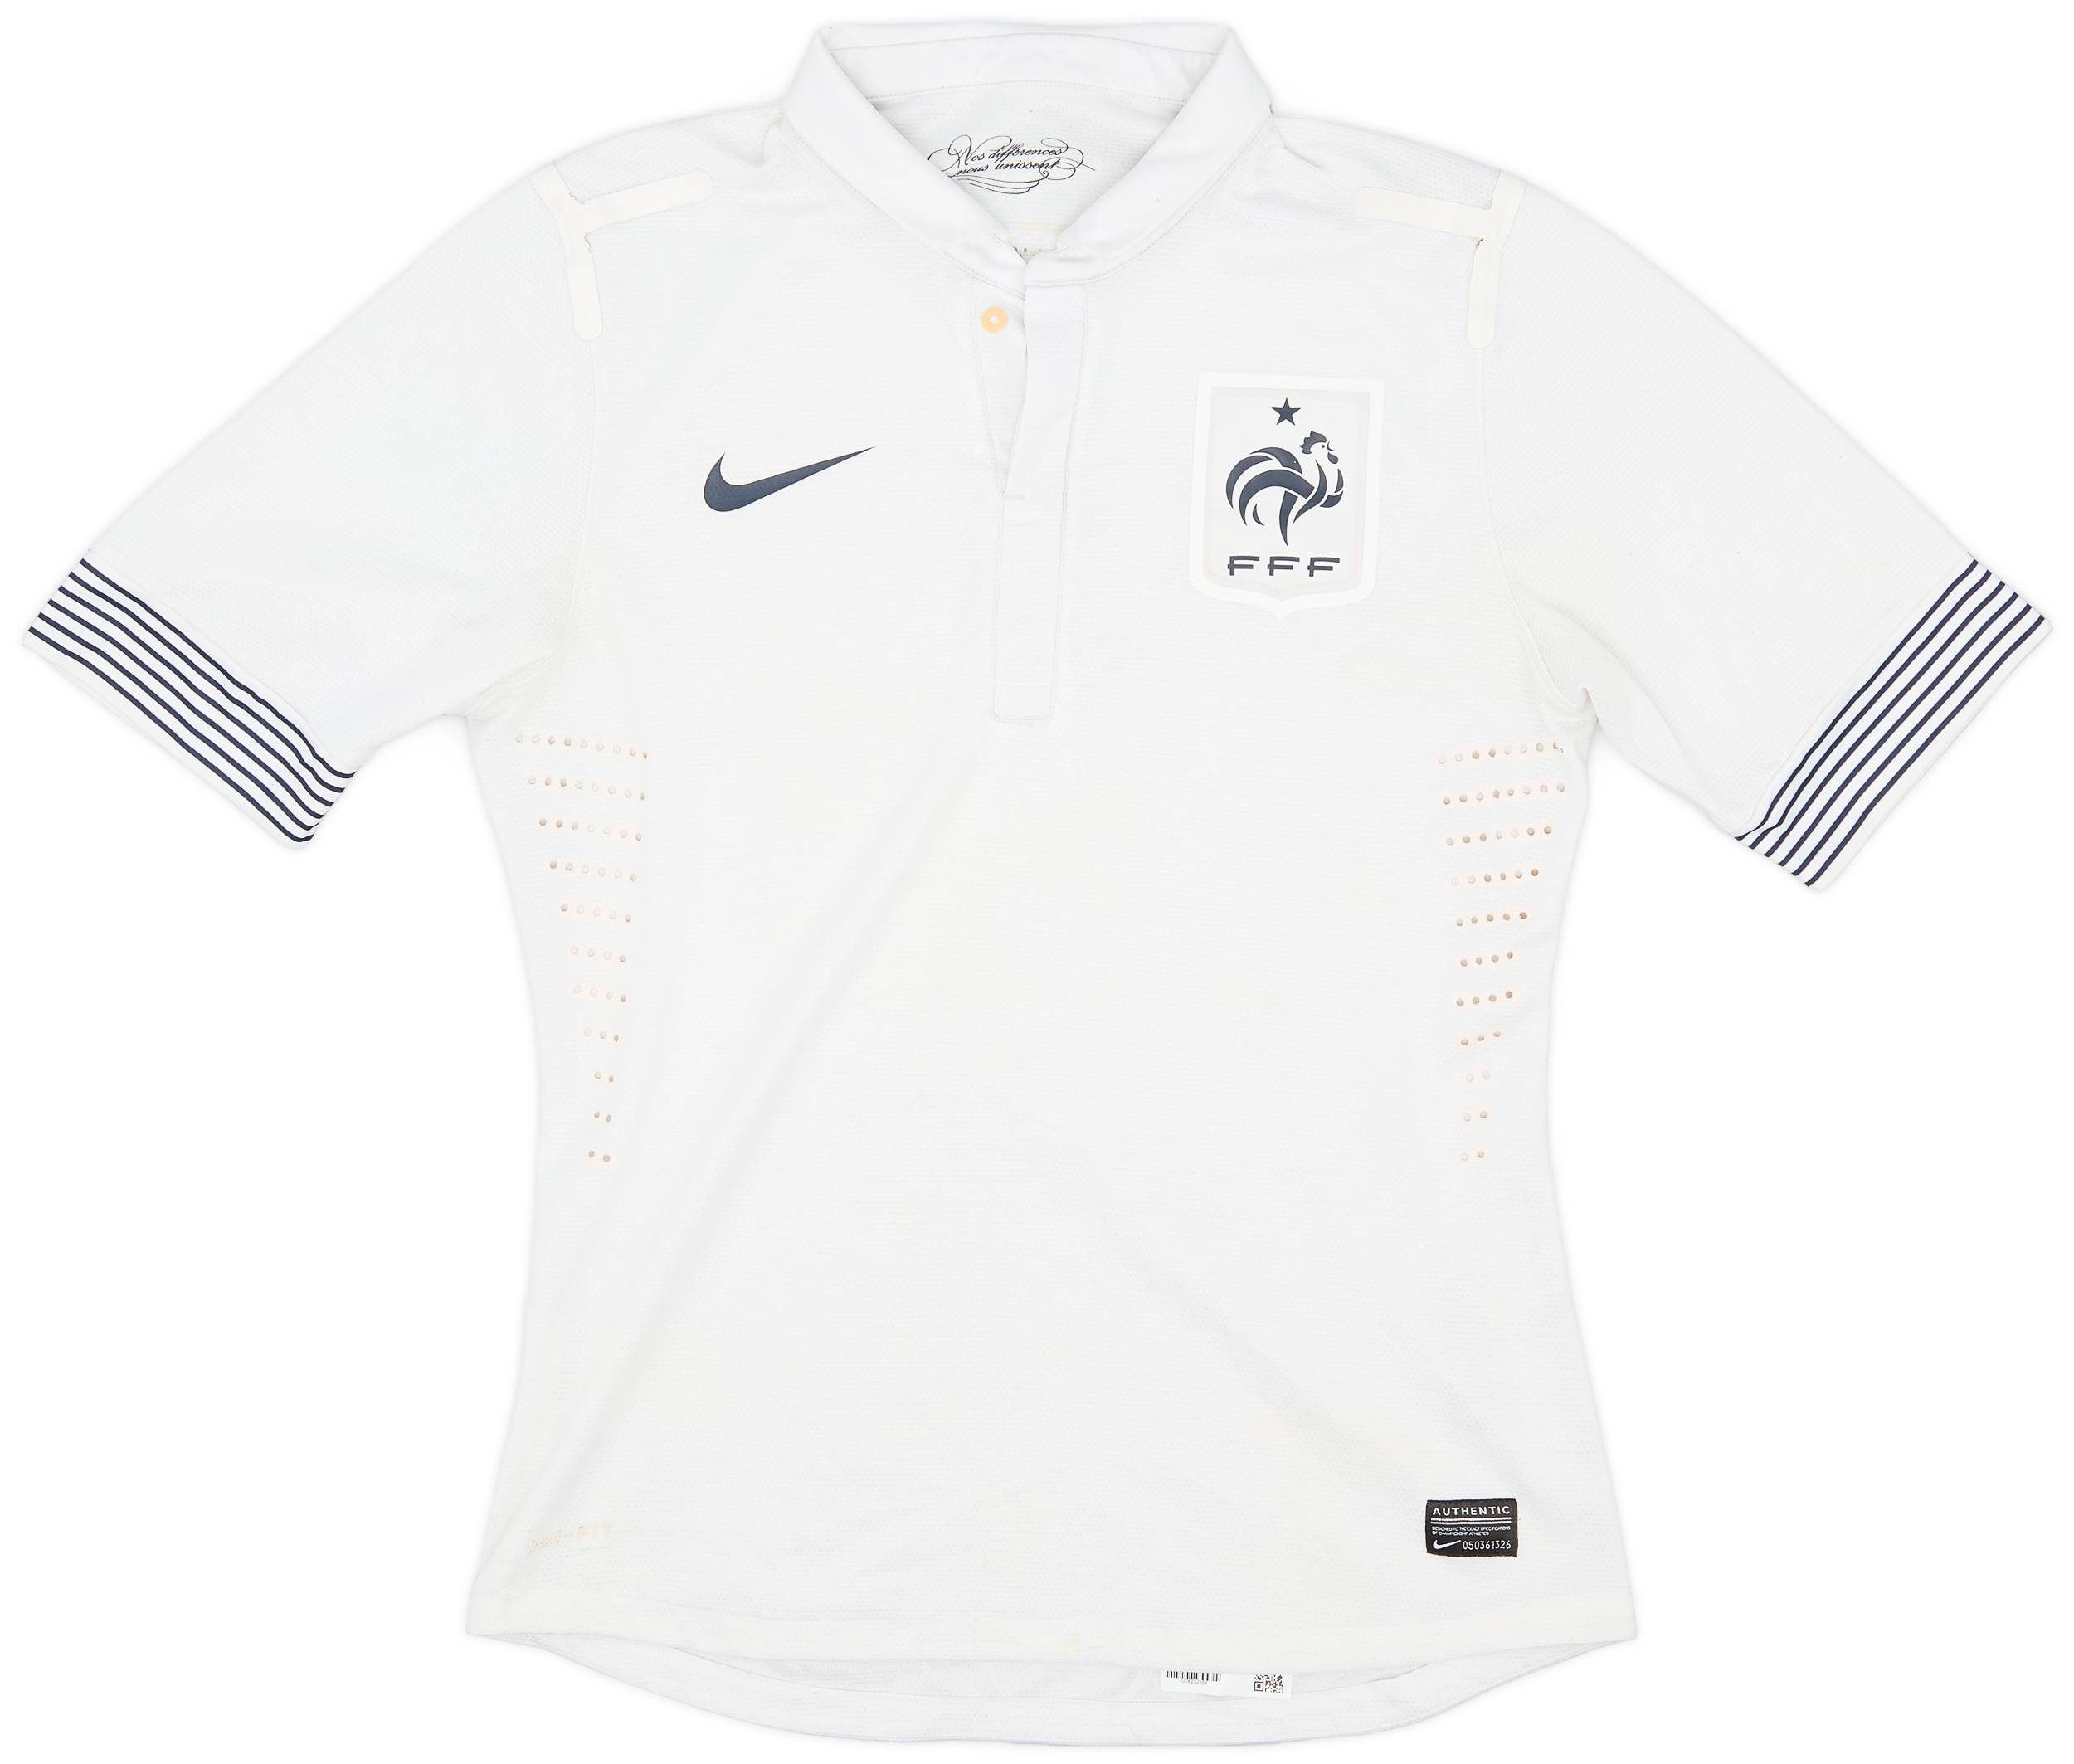 2012-13 France Player Issue Away Shirt - 5/10 - (M)